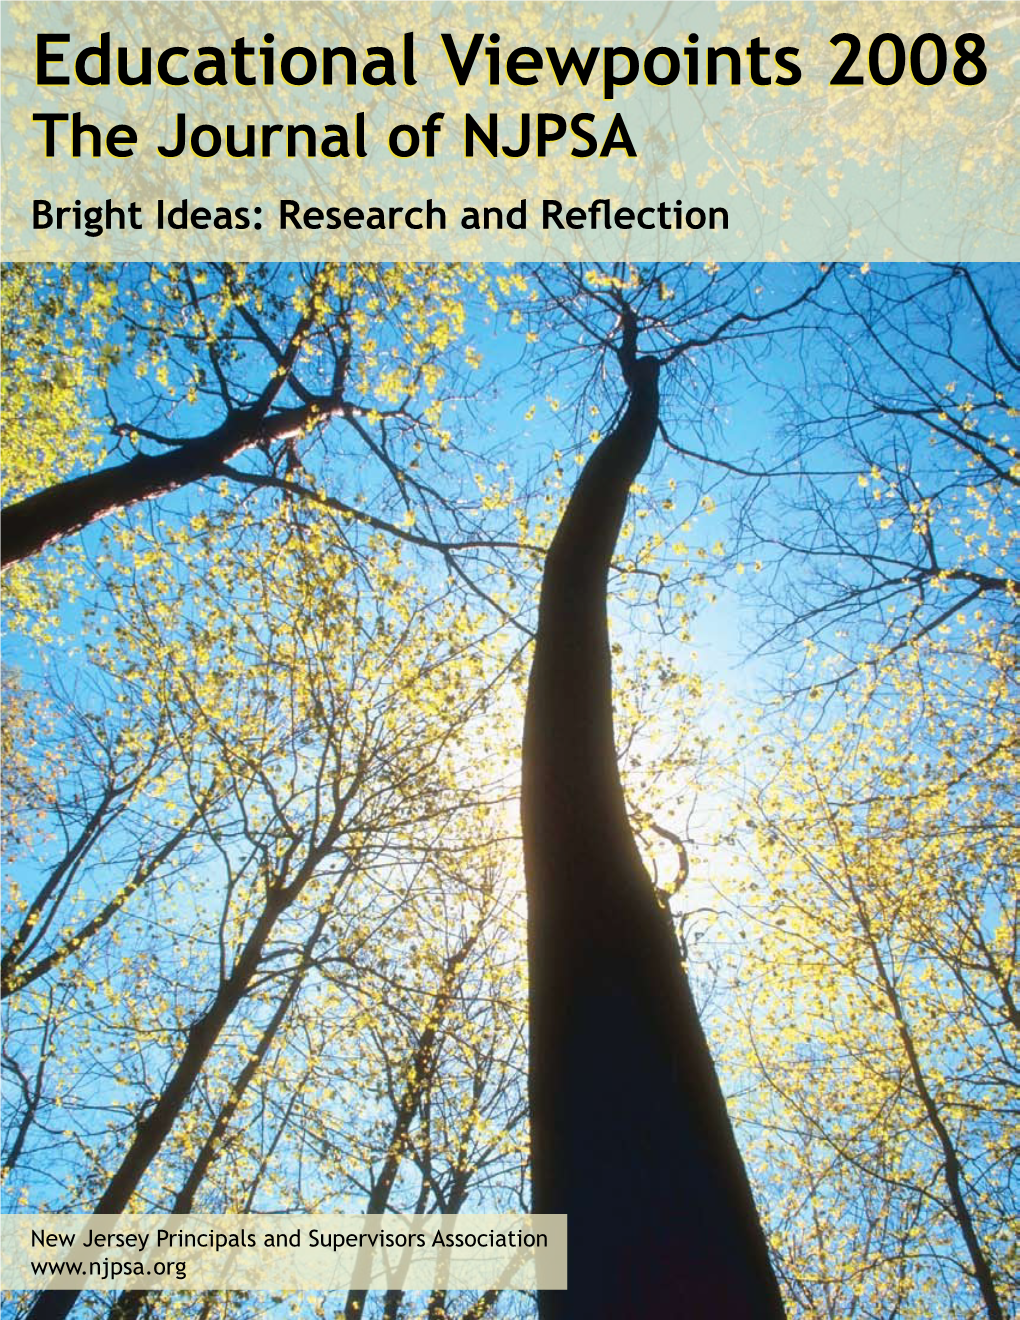 Educational Viewpoints 2008 the Journal of NJPSA Bright Ideas: Research and Reflection